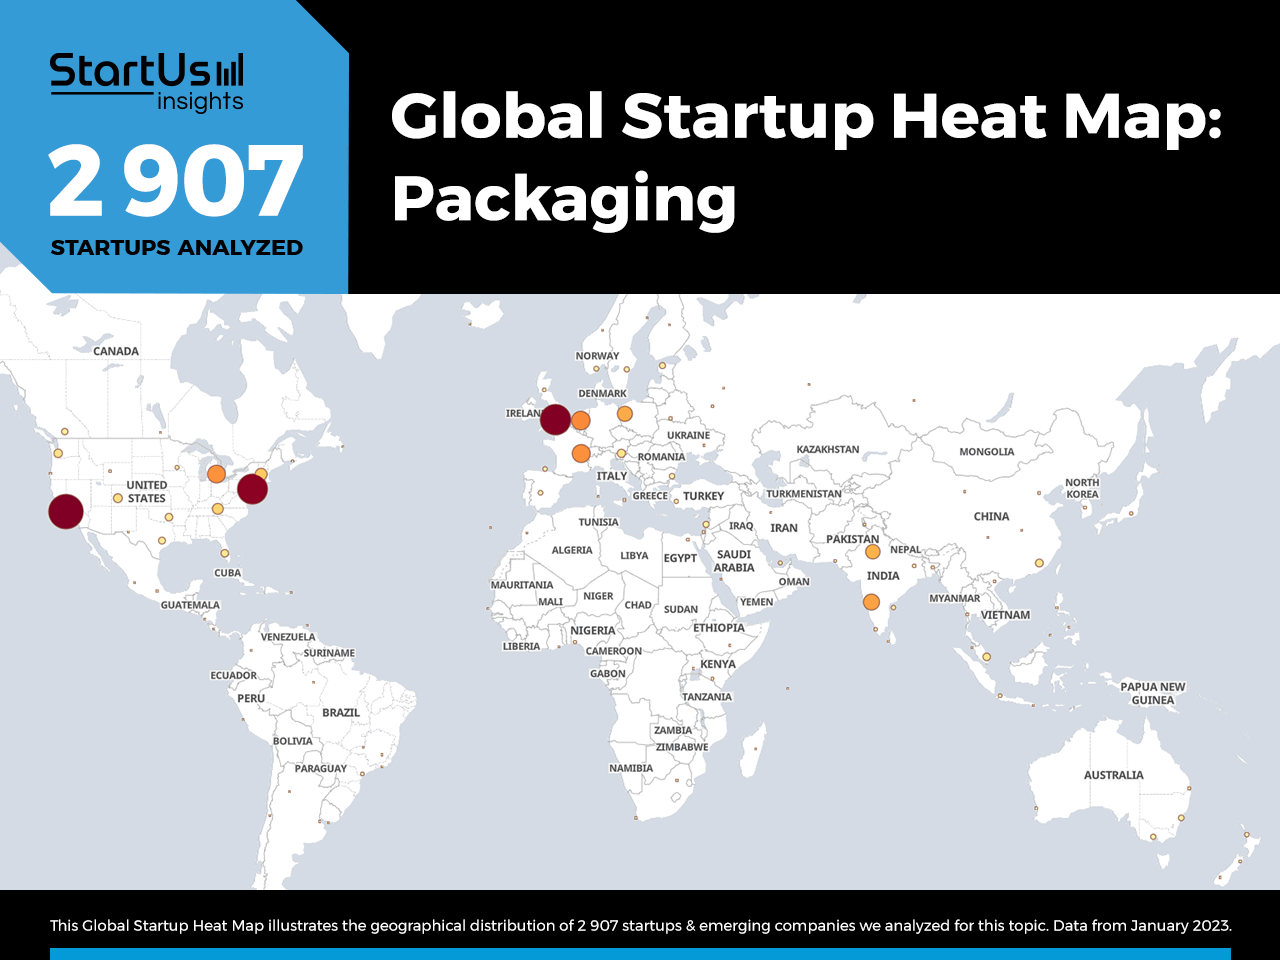 Packaging-Trends-Heat-Map-StartUs-Insights-noresize